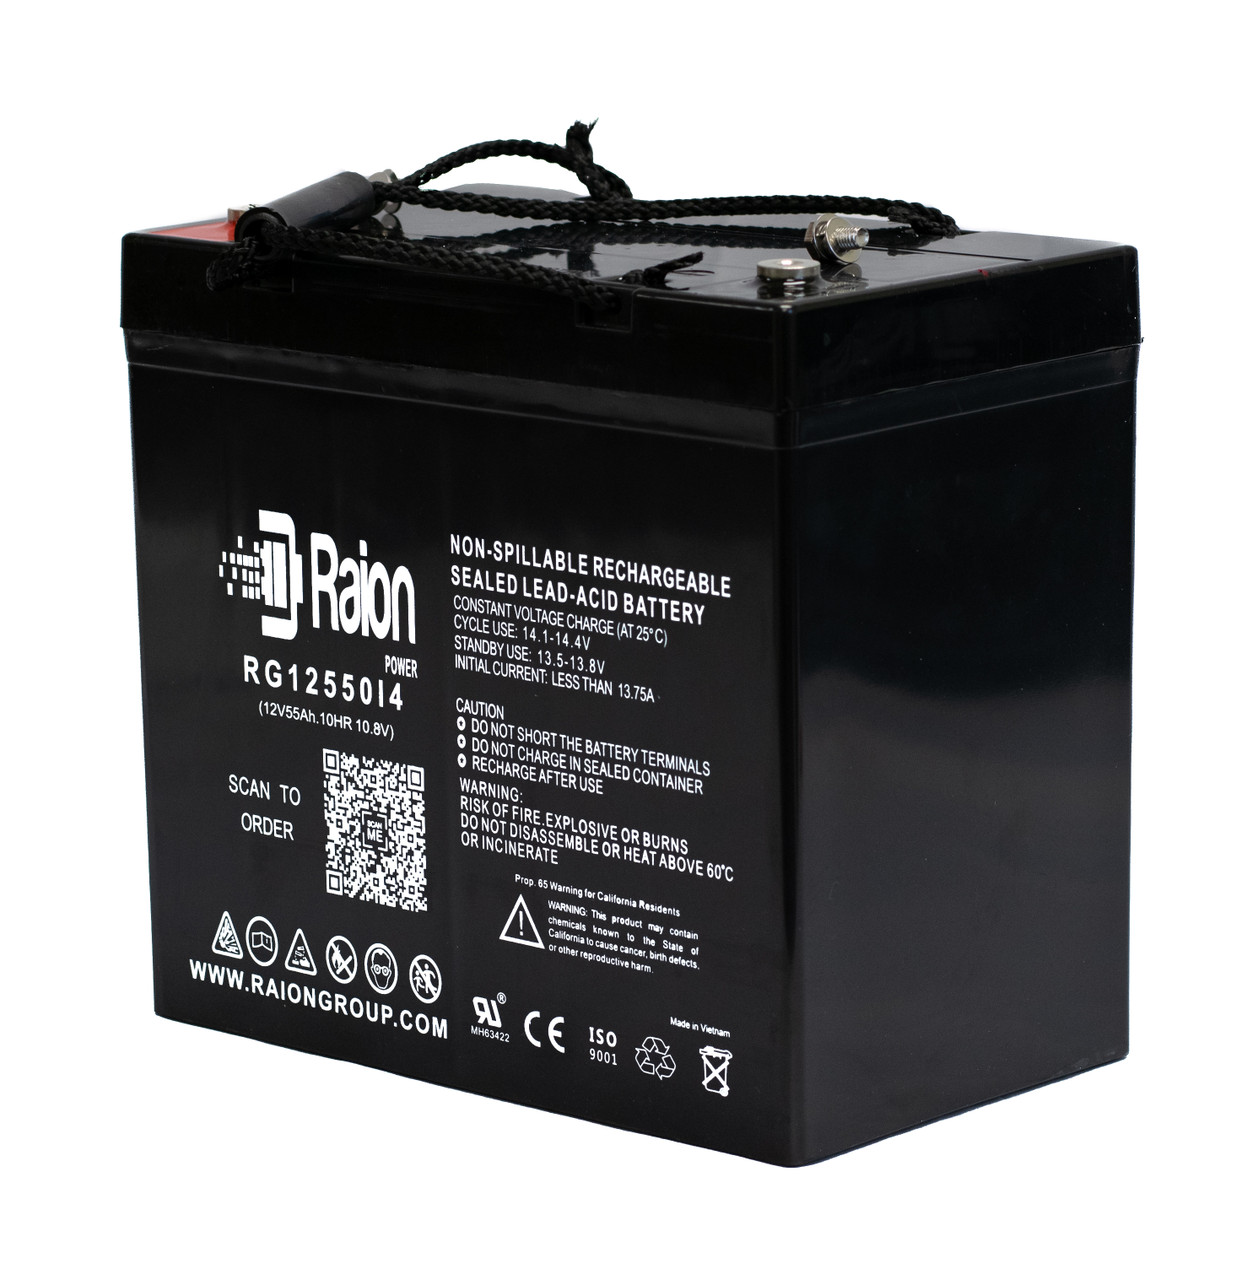 Raion Power 12V 55Ah 22NF Mobility Scooter Battery Replacement for Invacare Ranger II CAPT